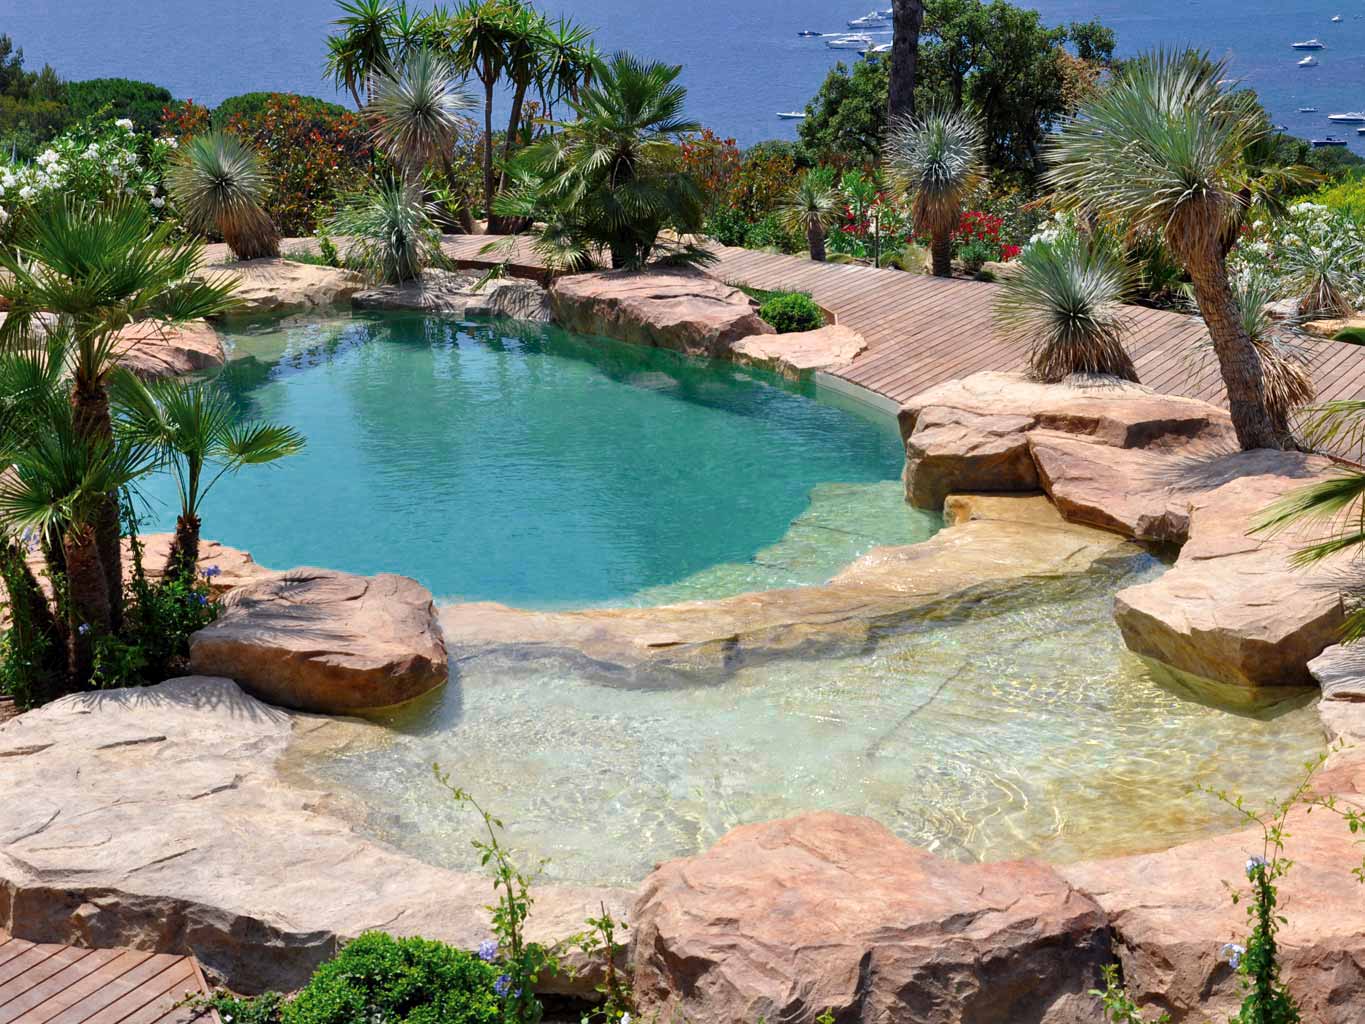 Natural Swimming Pool Design Ideas With Good View Several Plant Pure Water Amazing Pool Design Clear Sky For Feel Fresh  Pool Design